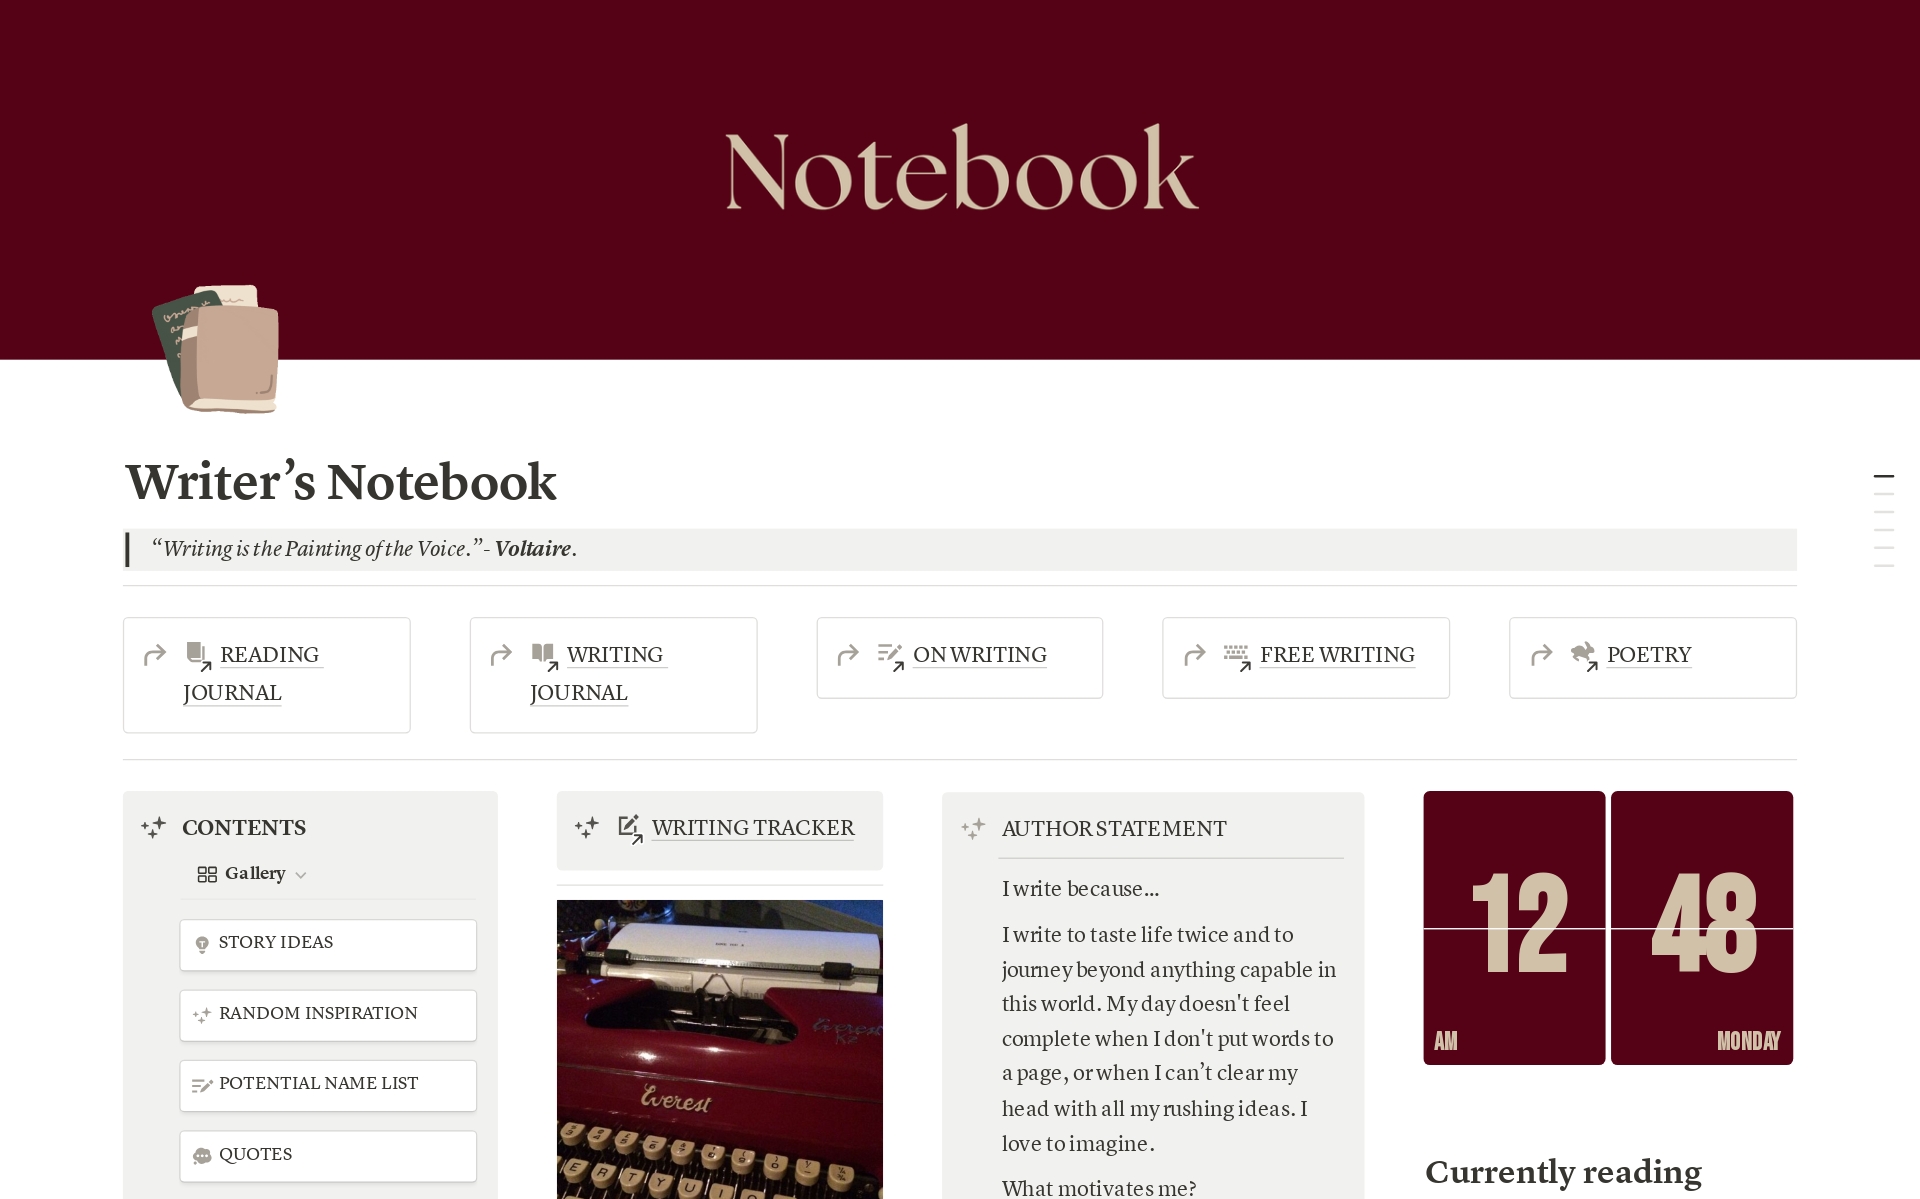 GET EVERYTHING YOU NEED IN A WRITERS NOTEBOOK AND MORE! WELCOME THE ULTIMATE NOTION TEMPLATE FOR WRITERS! ORGANIZE YOUR PROJECTS AND BECOME A BETTER WRITER WITH THIS TEMPLATE BUILT TO COMPACT EVERYTHING YOU NEED AS A WRITER AND MORE! INCLUDES BOOK LIBRARY AND VIDEO TURORAL!